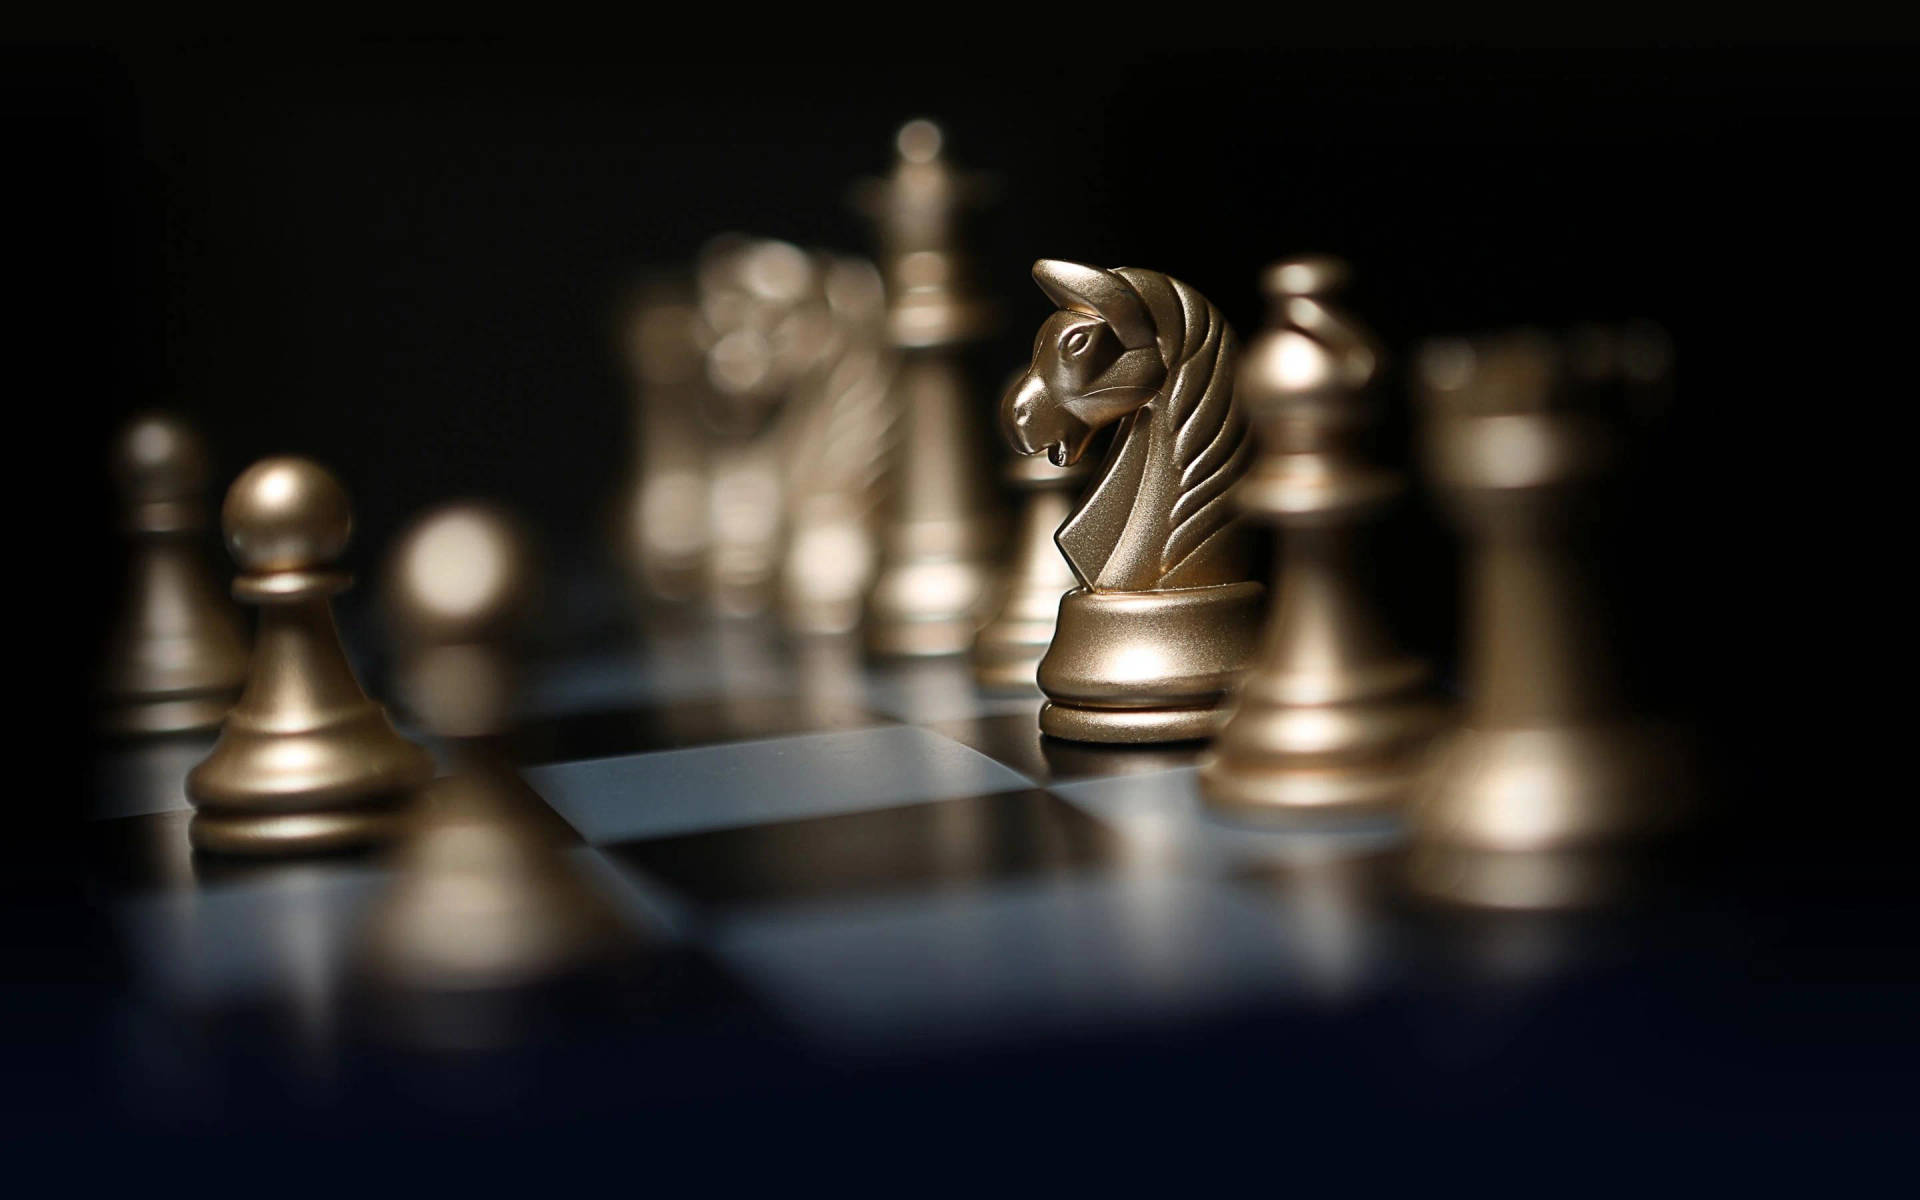 Free Chess Wallpaper Downloads, Chess Wallpaper for FREE